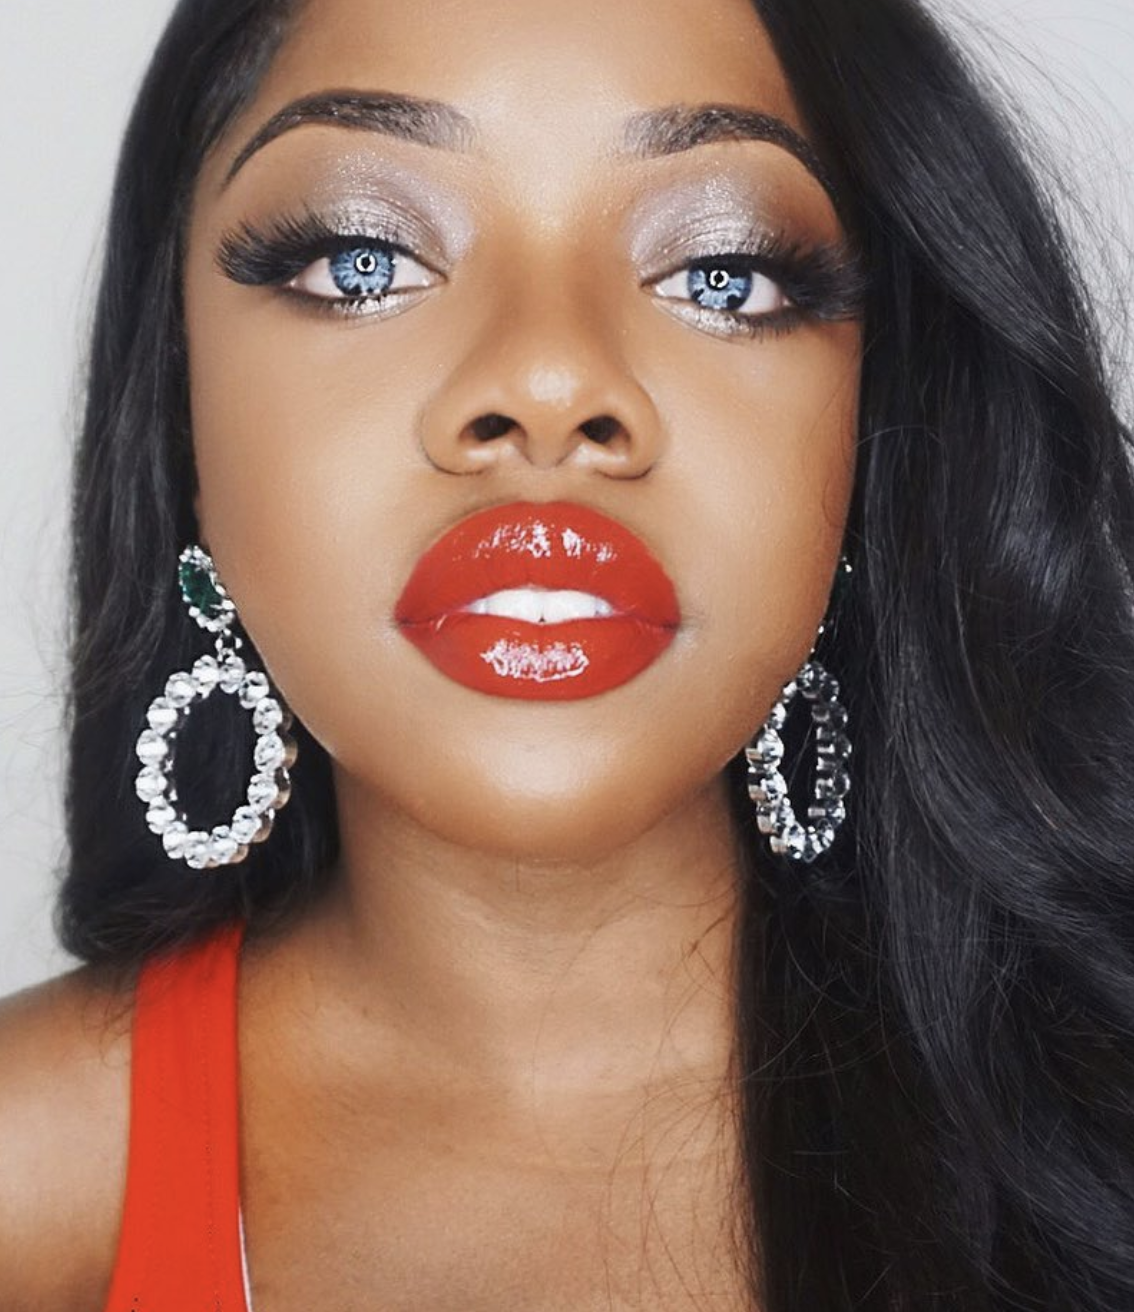 17 Stunning Pics That Prove Red Lipstick Was Made For Big Lips.